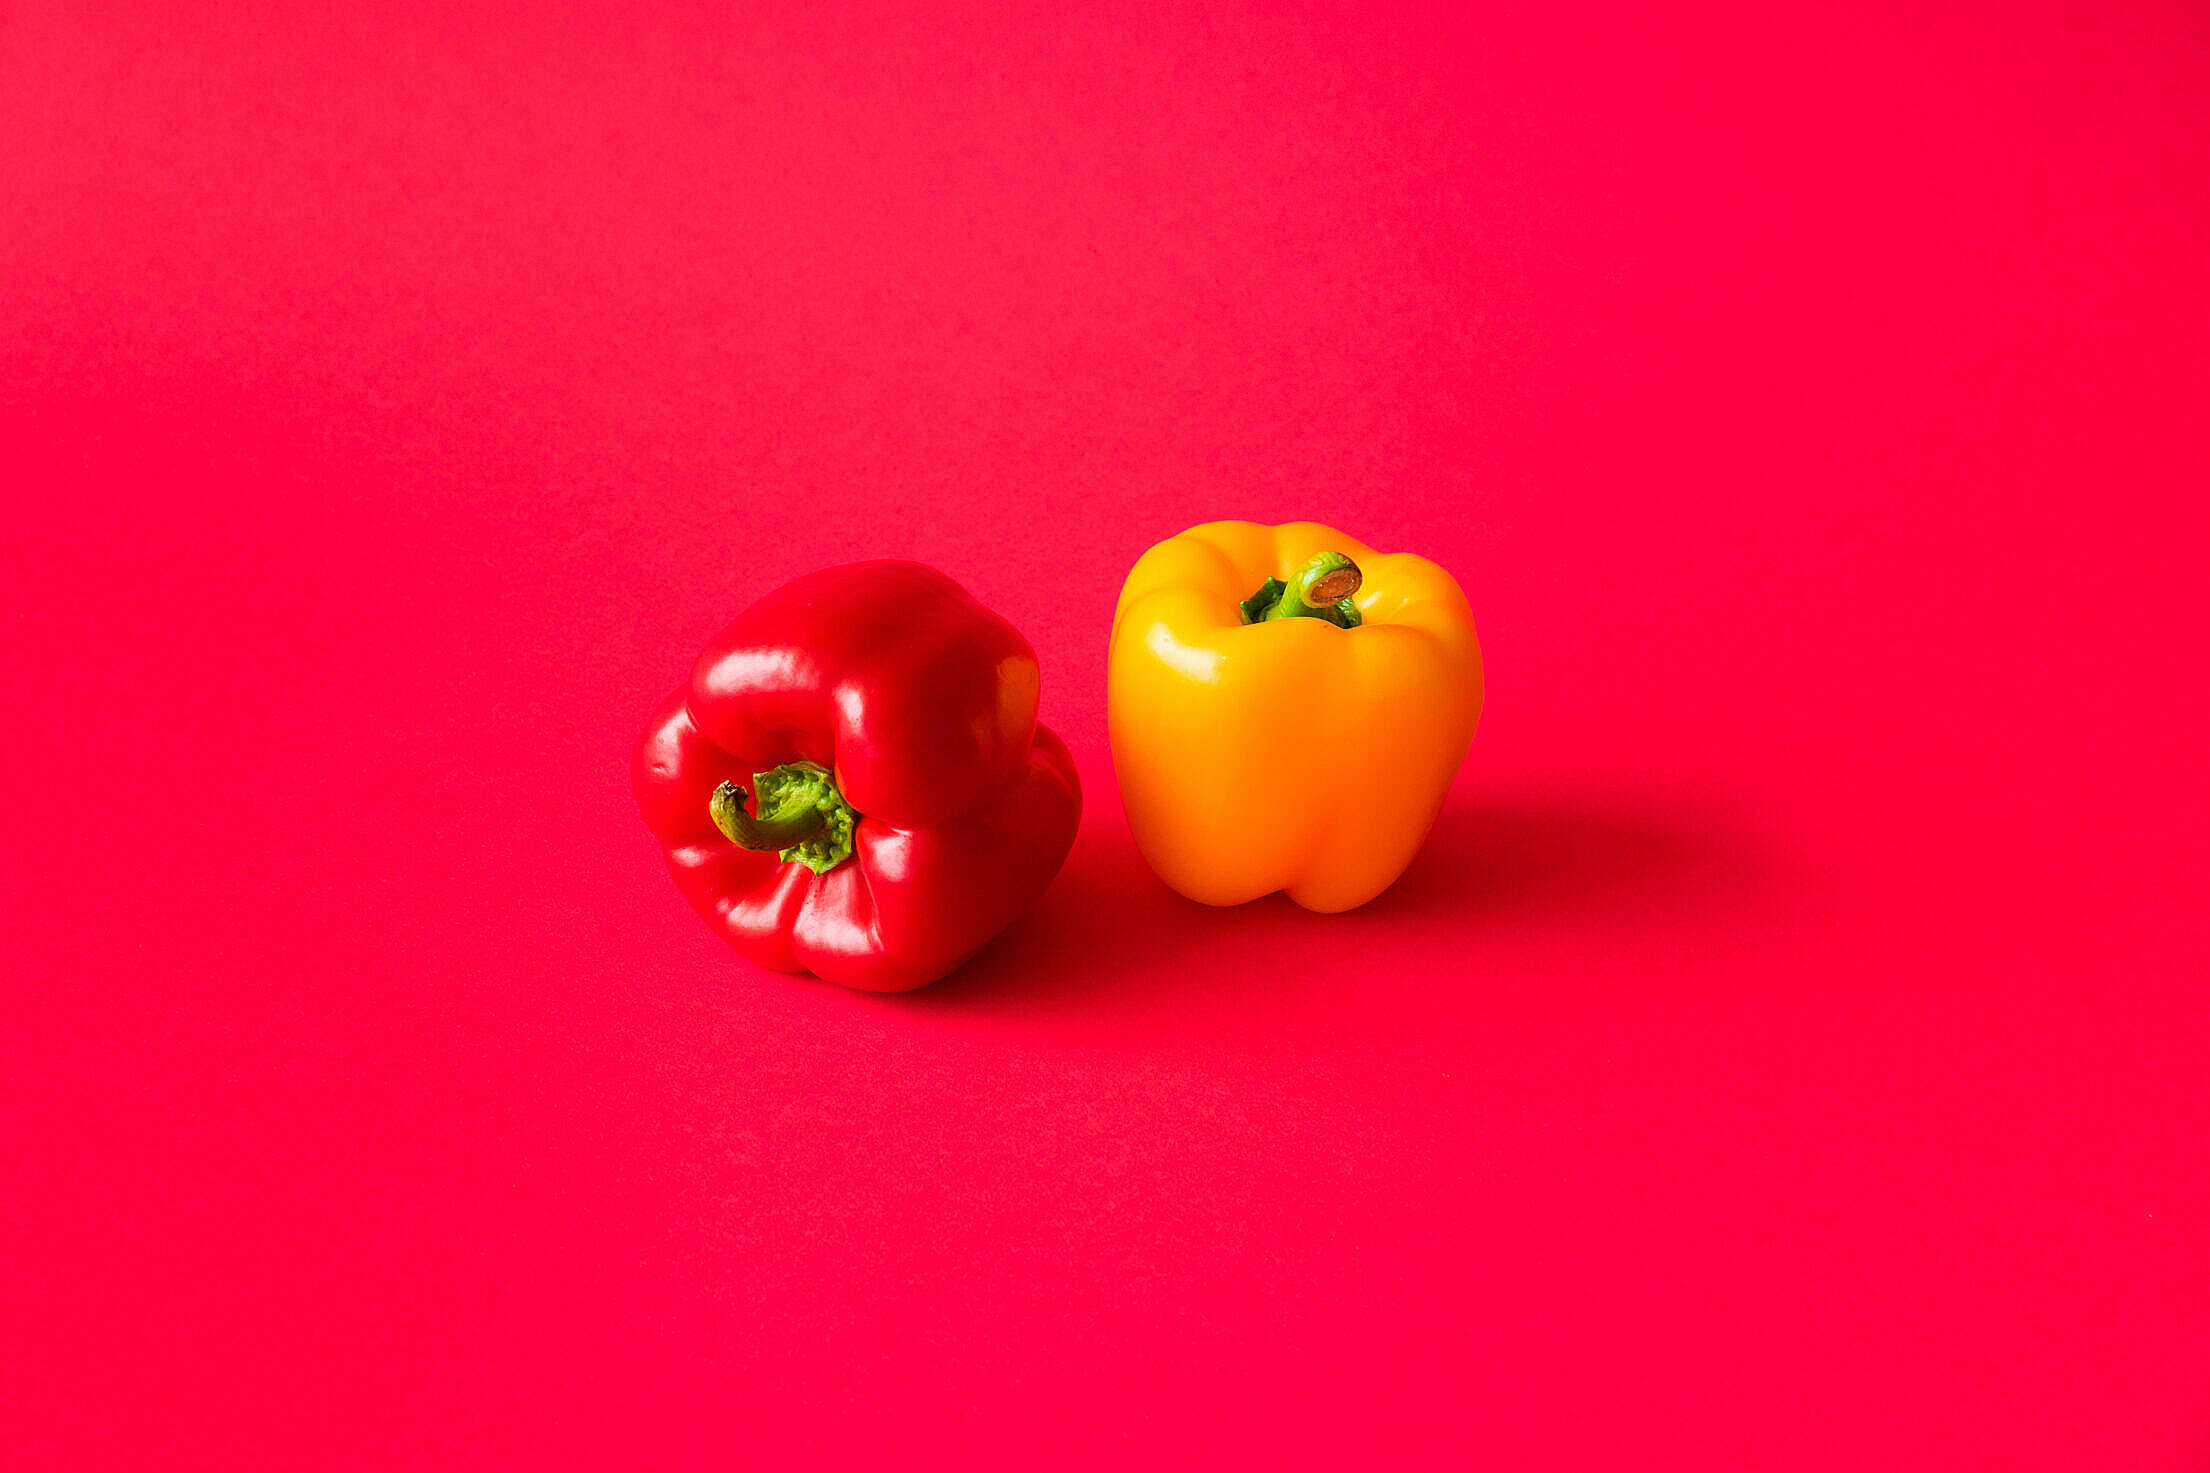 Colorful pepper display, Flat background imagery, Vibrant and fresh, Still life capture, 2210x1480 HD Desktop